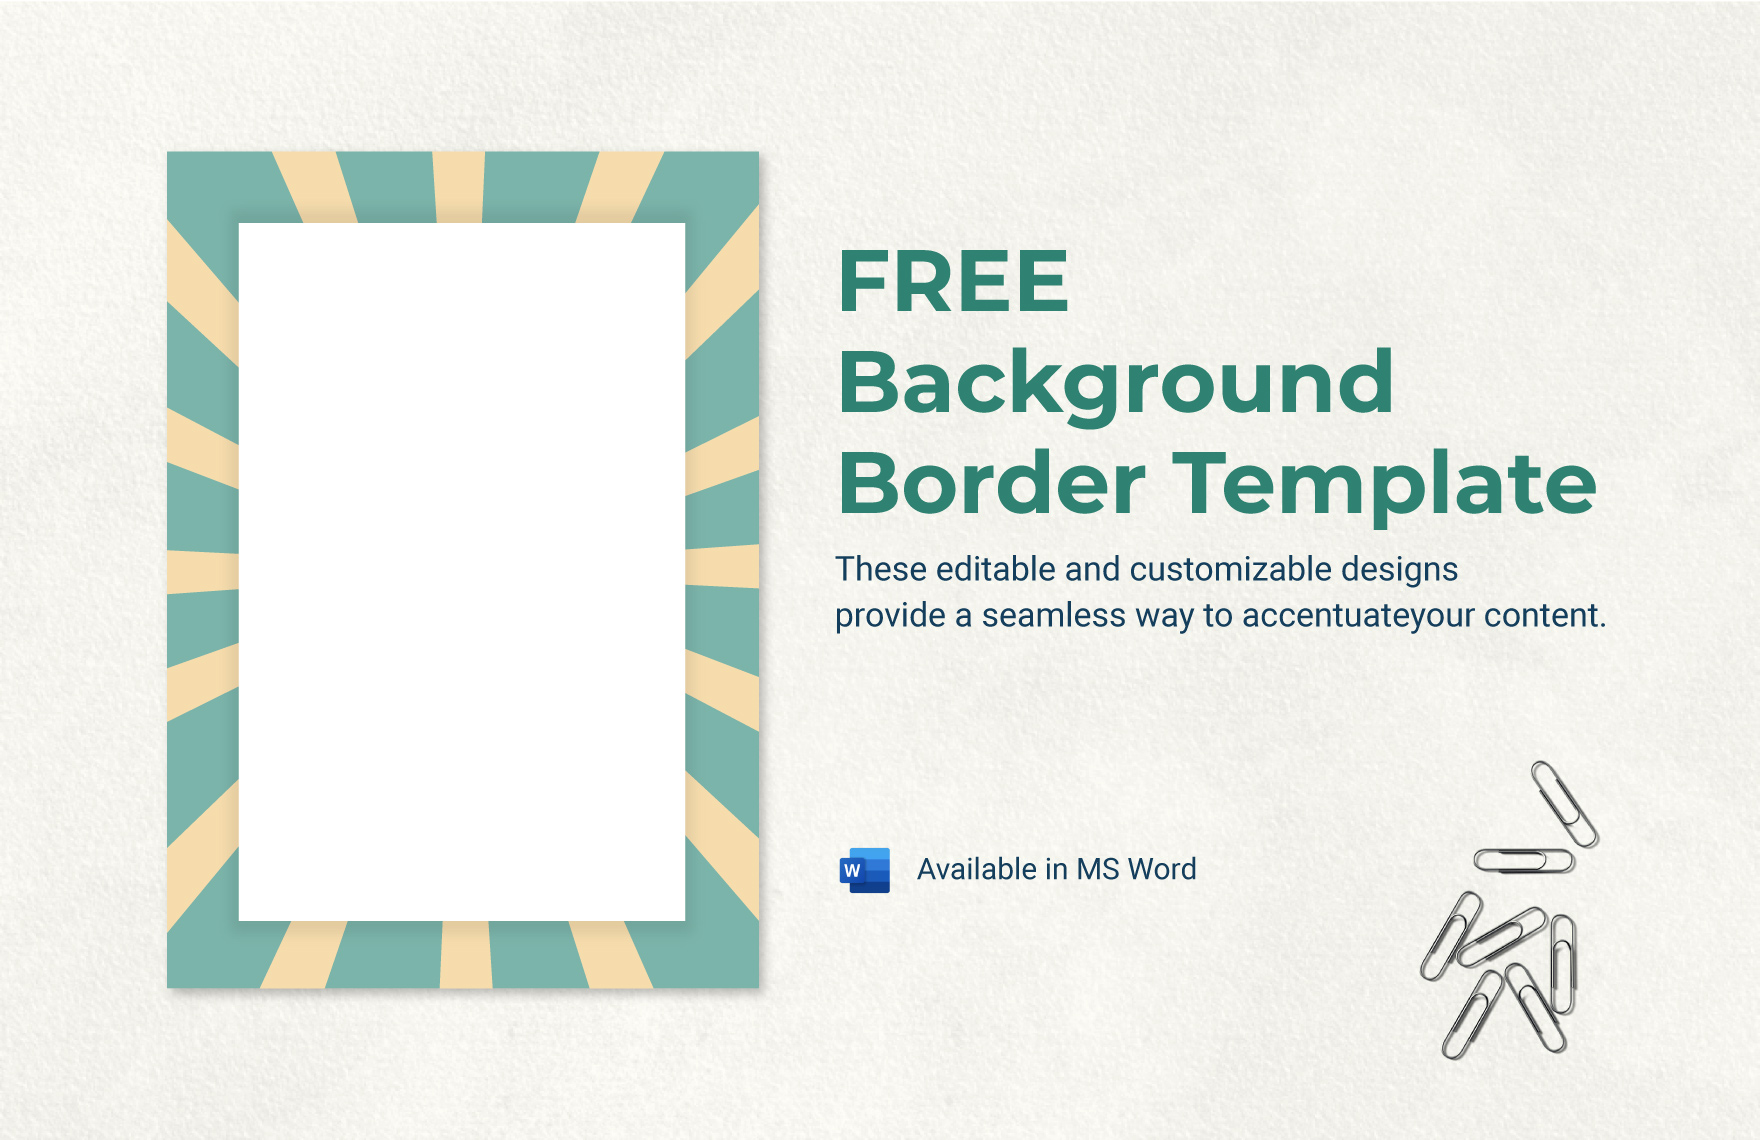 Free and customizable background templates